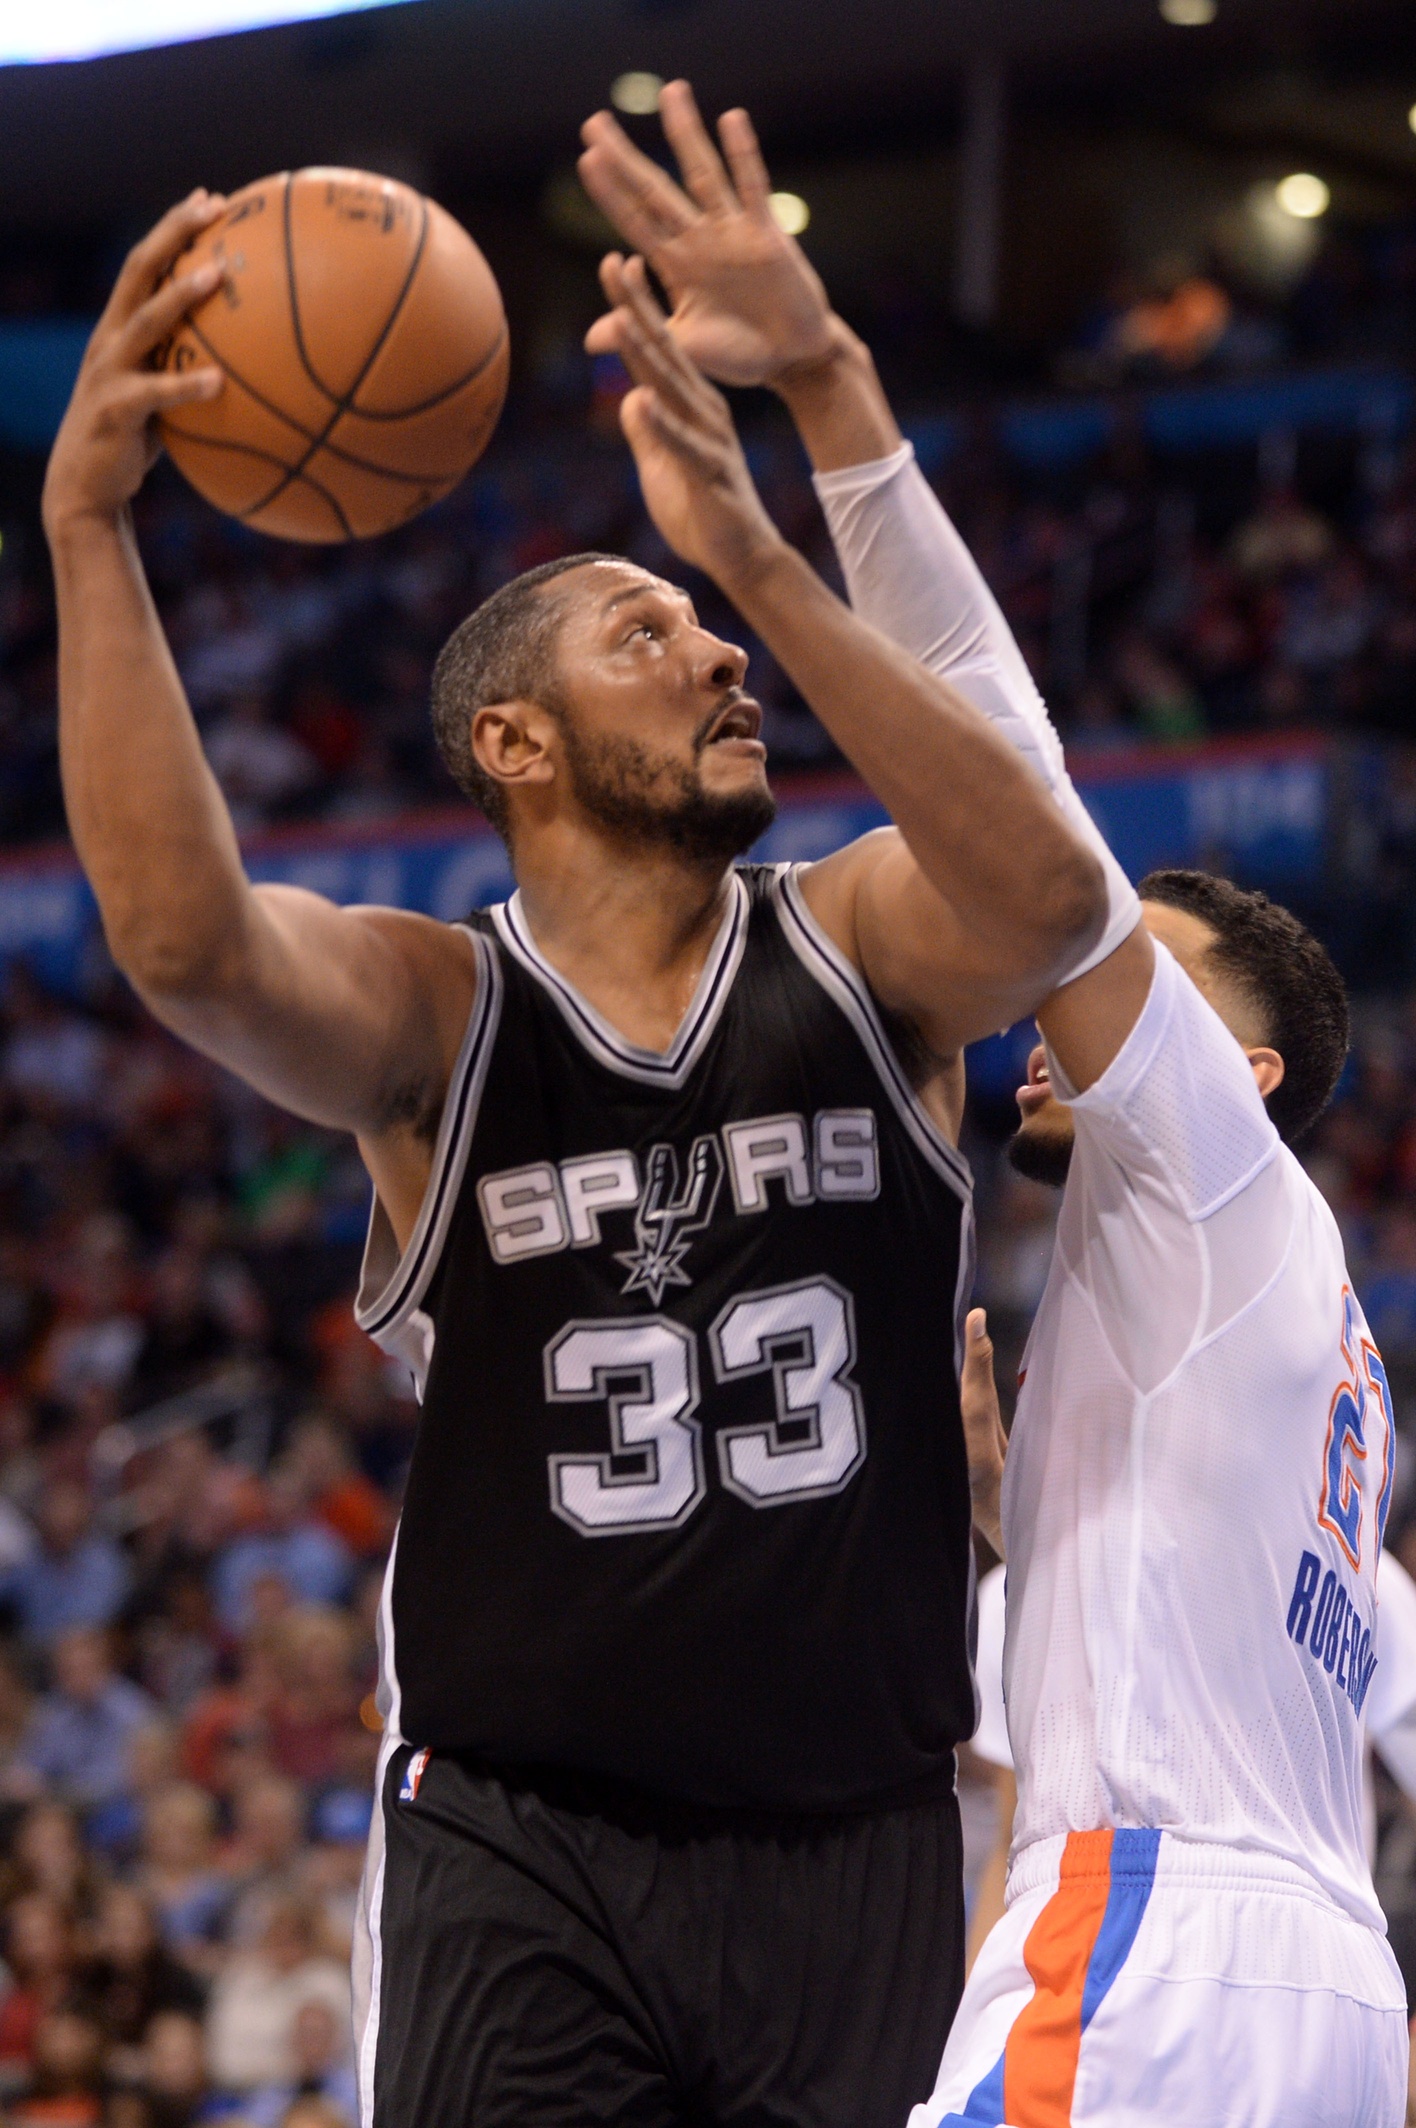 Boris Diaw signed his Spurs contract on a boat (PHOTO) - NBC Sports